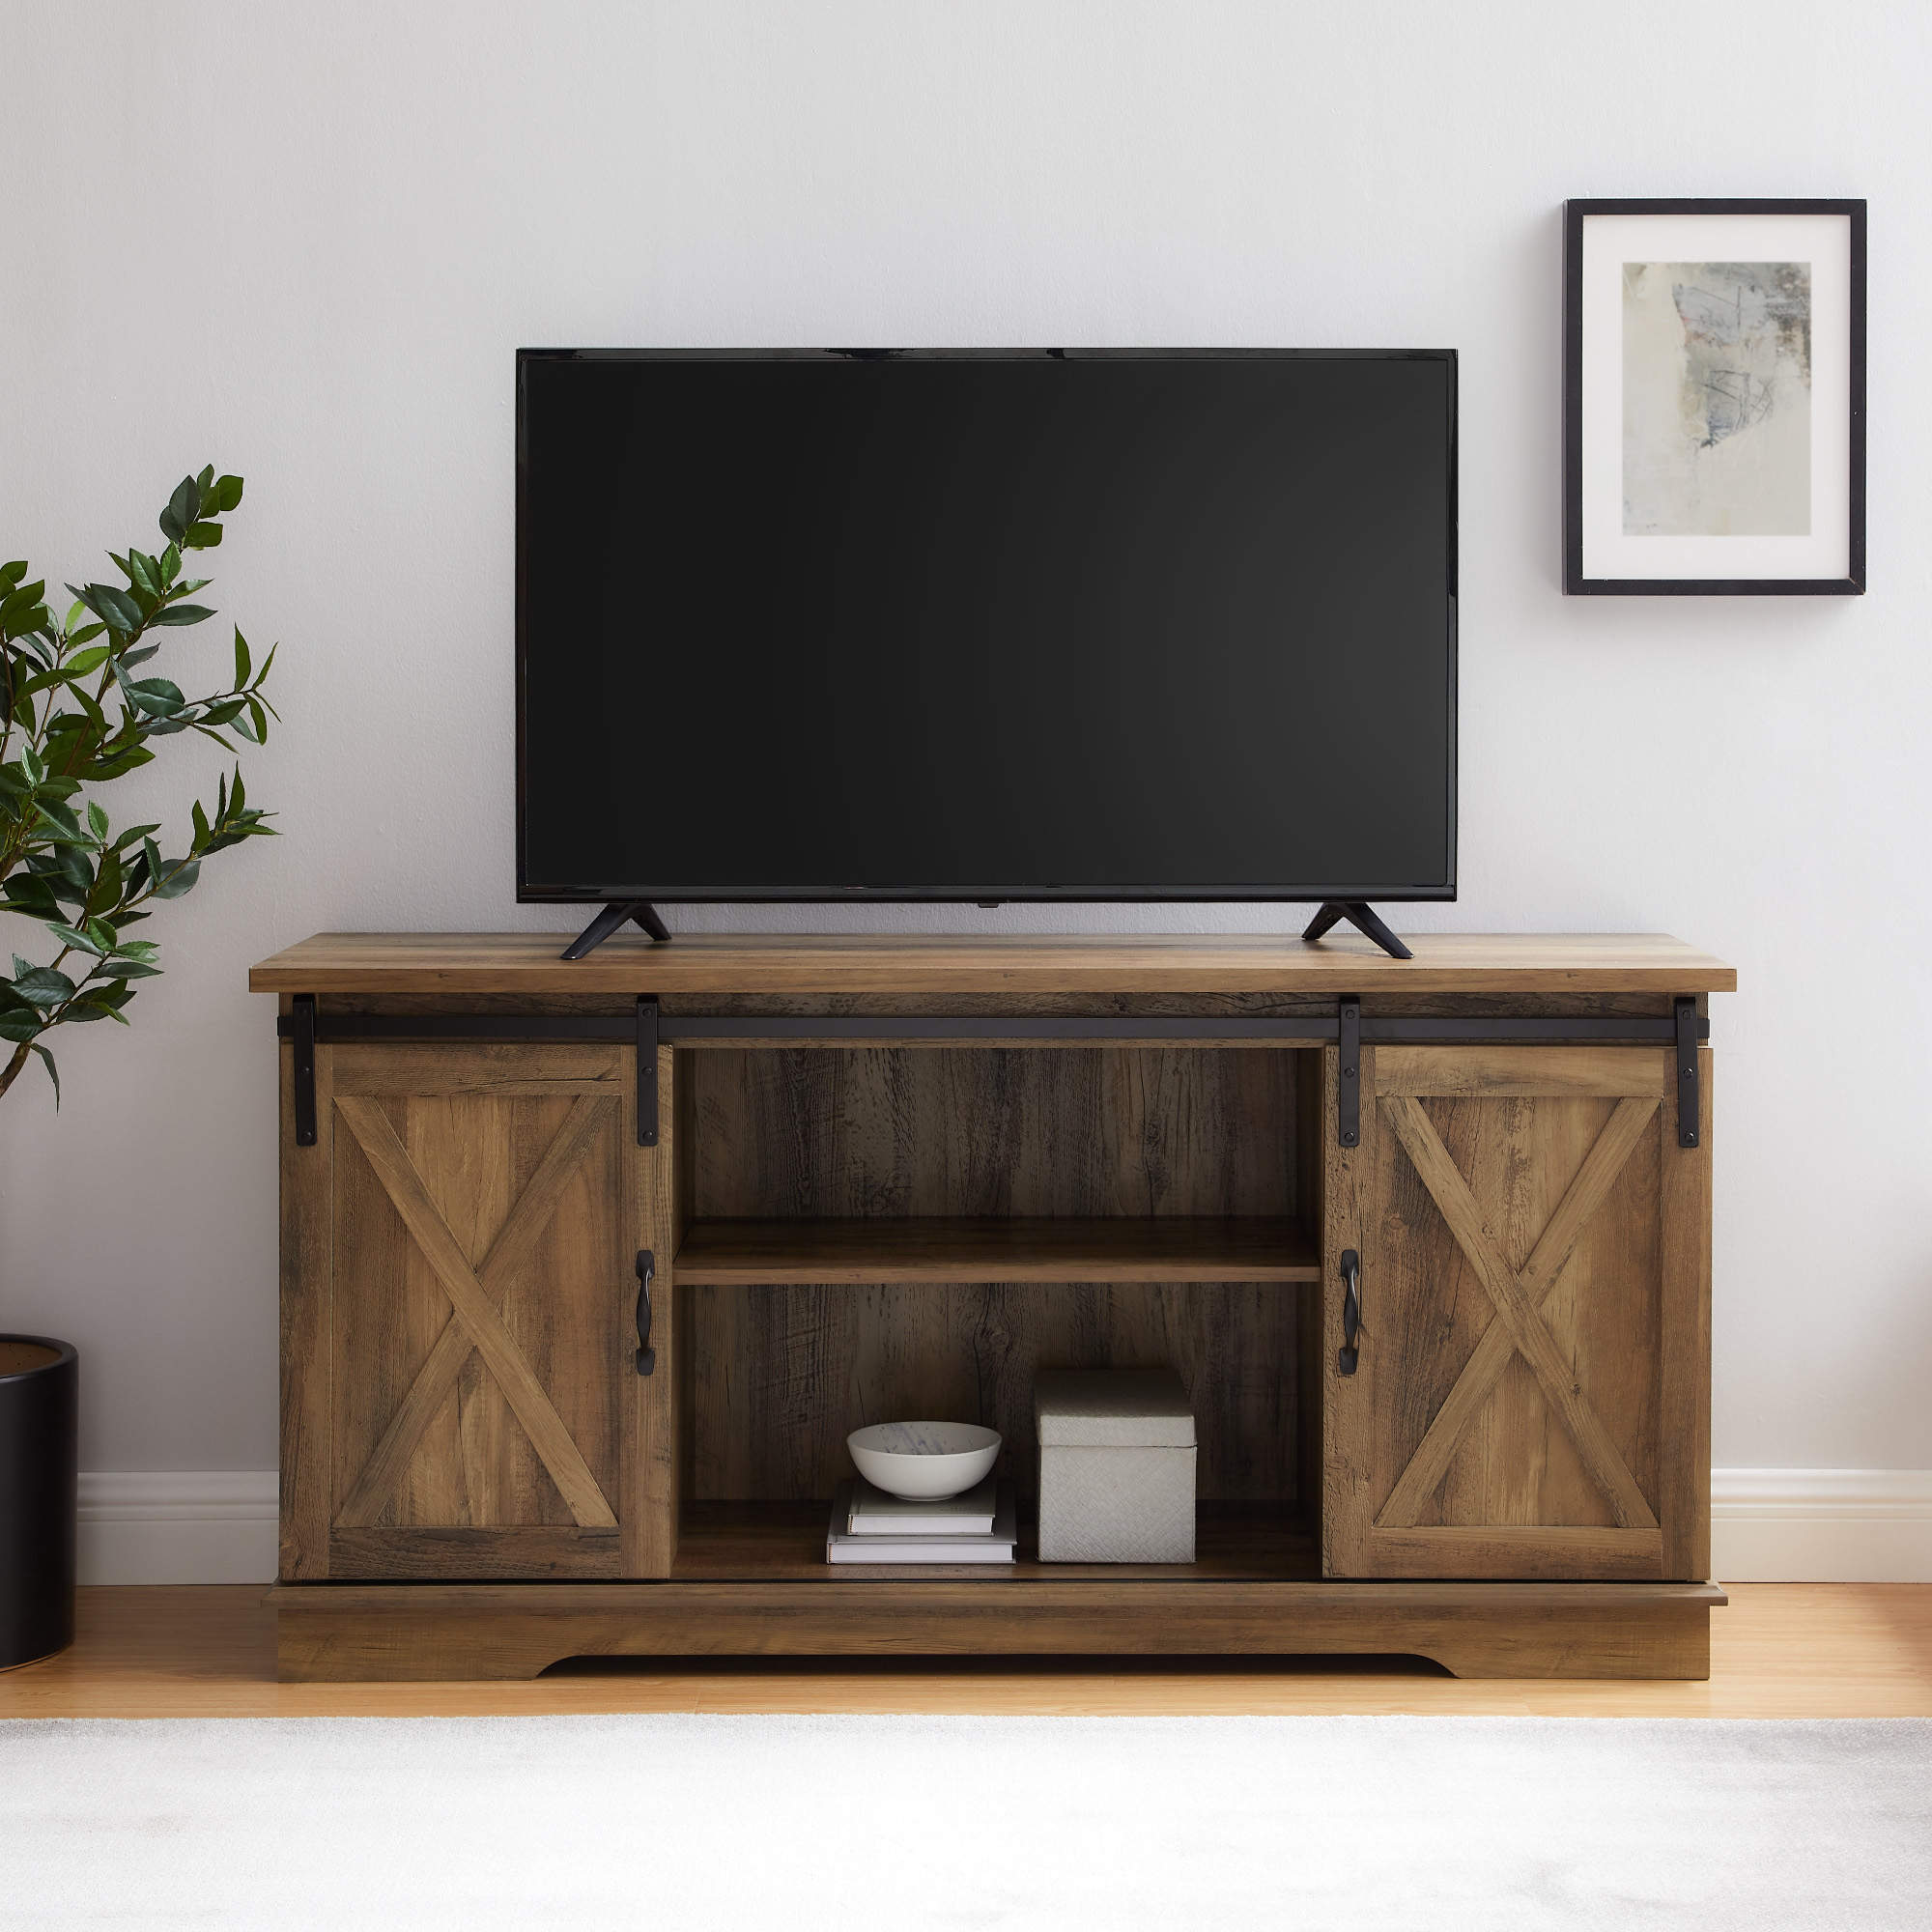 Woven Paths Sliding Farmhouse Barn Door TV Stand for TVs up to 65", Reclaimed Barnwood - image 3 of 11